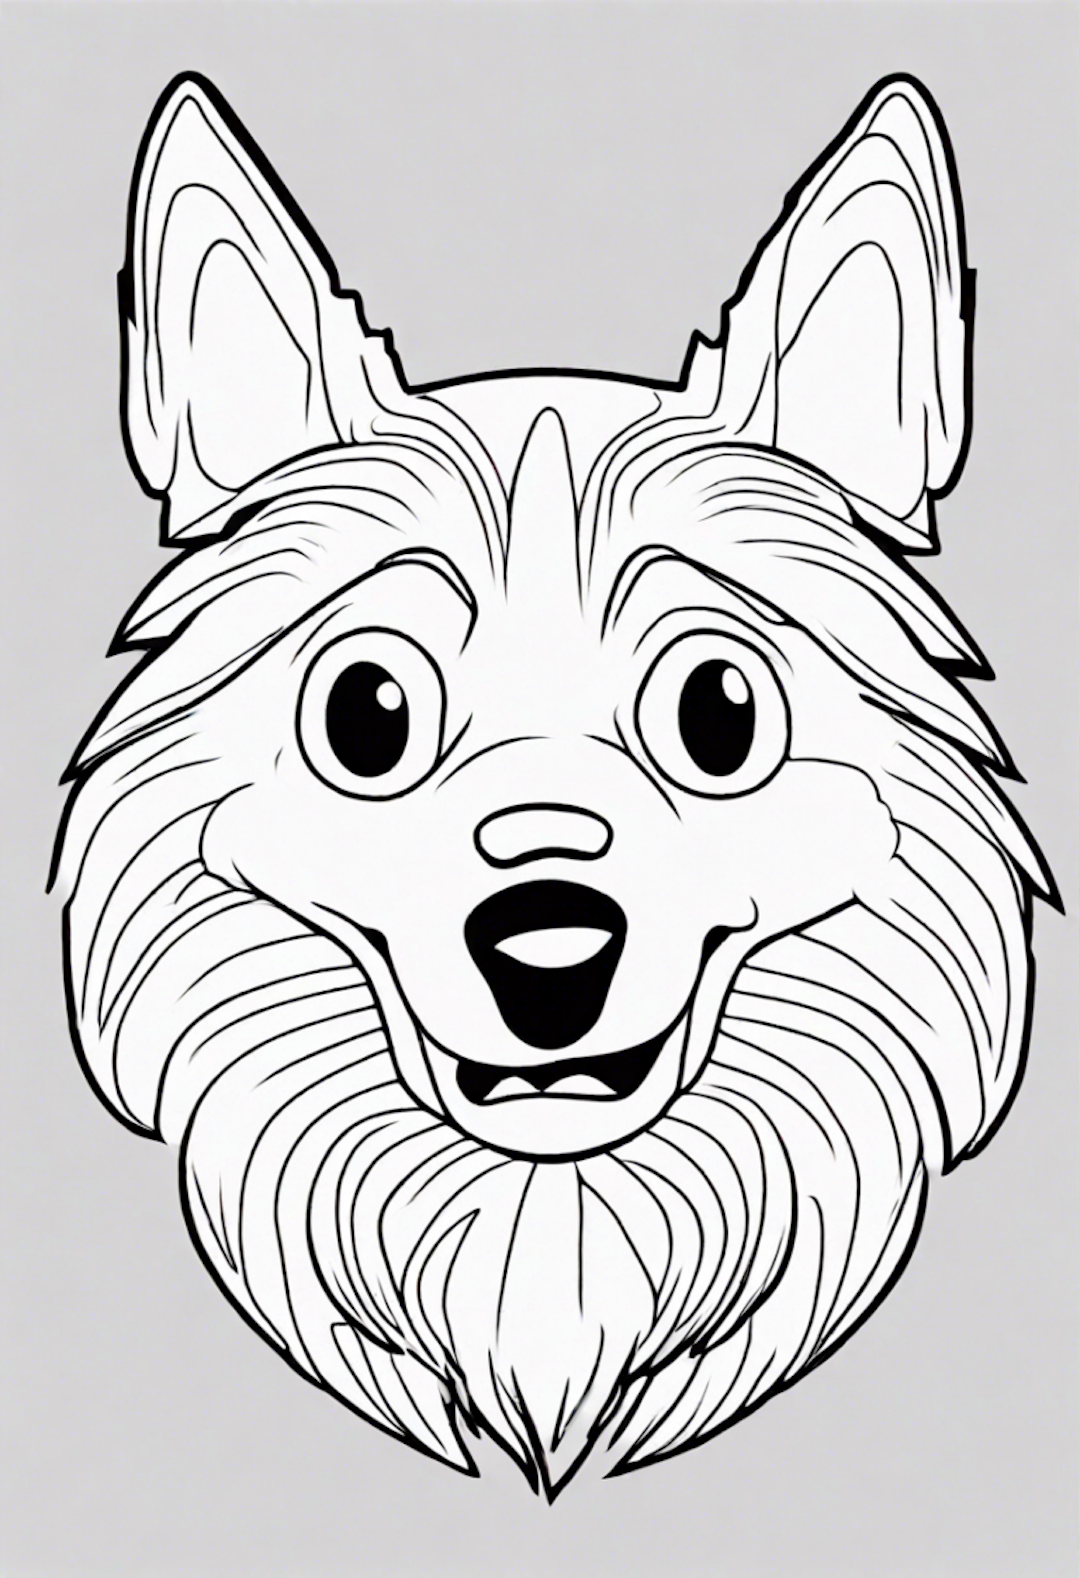 Joyful Wolf Coloring Page coloring pages